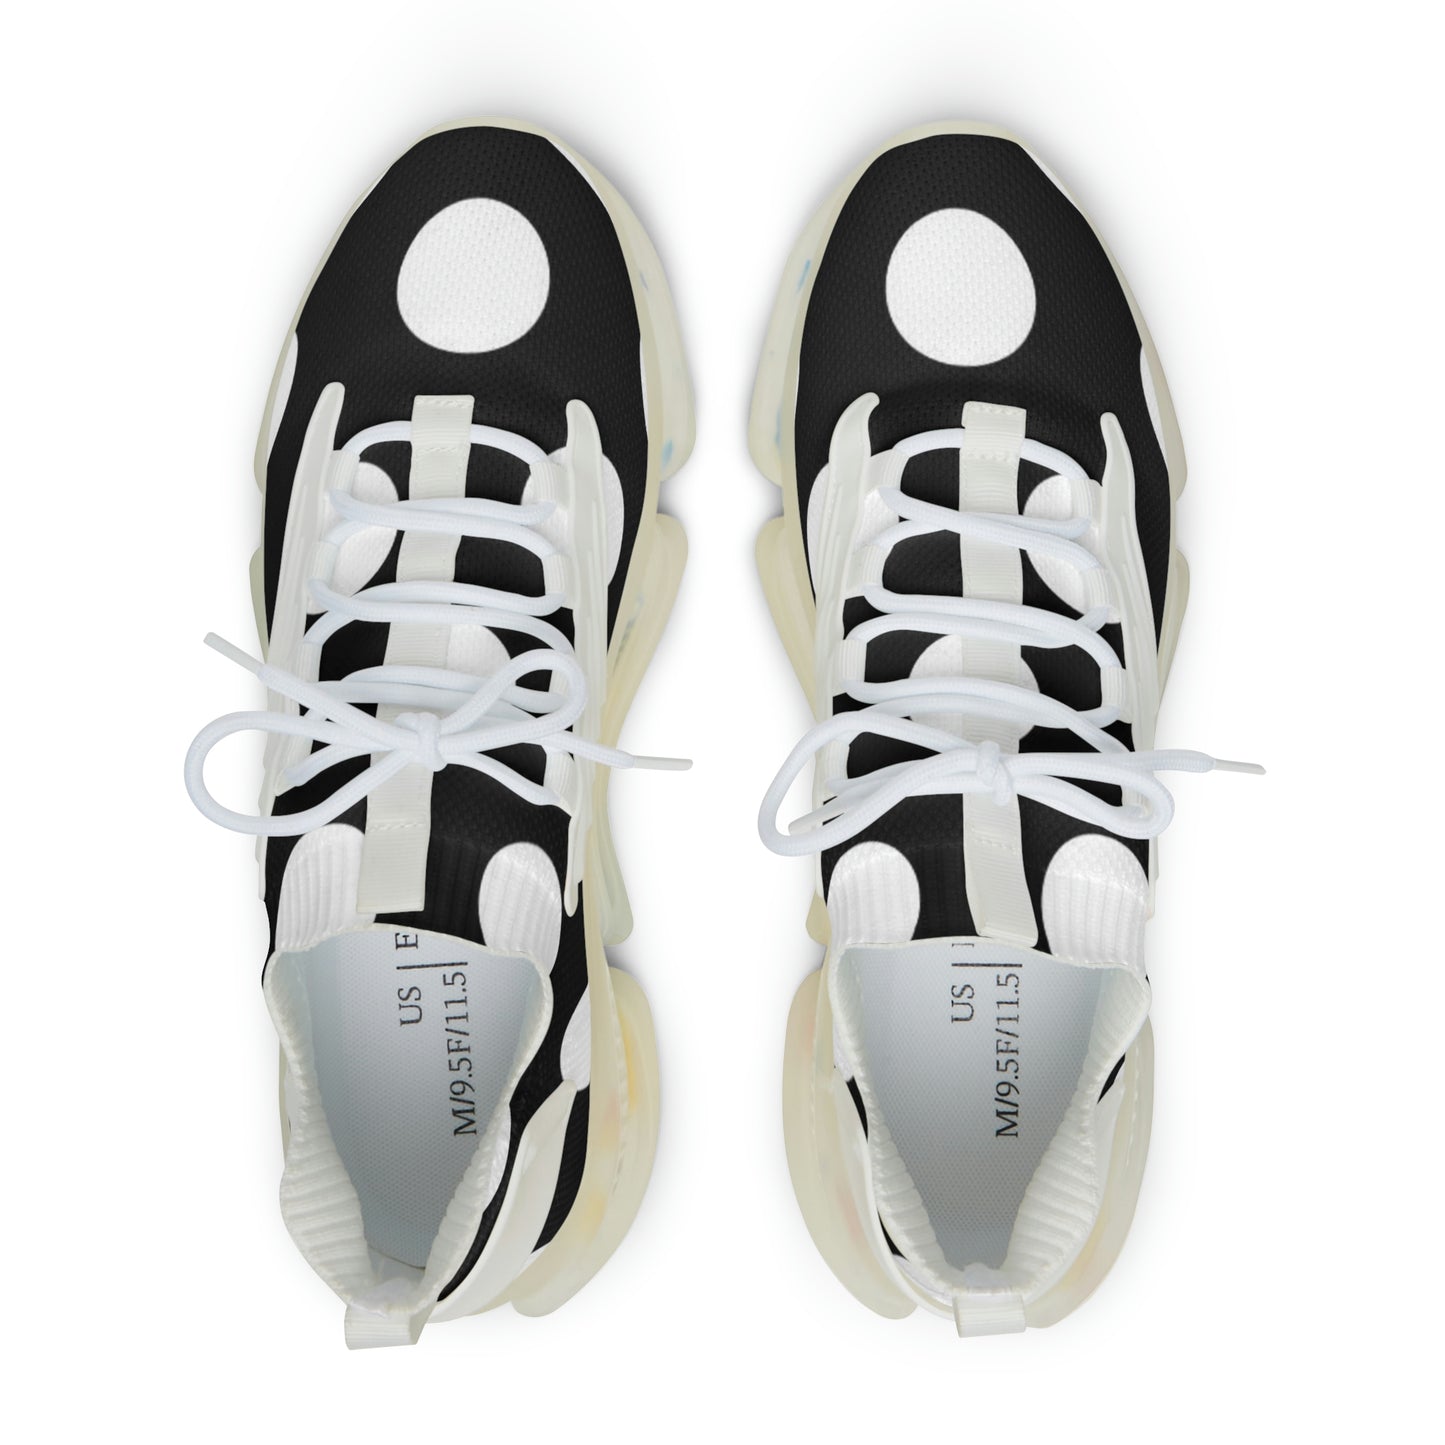 Olympian "Dash Out" Sneakers